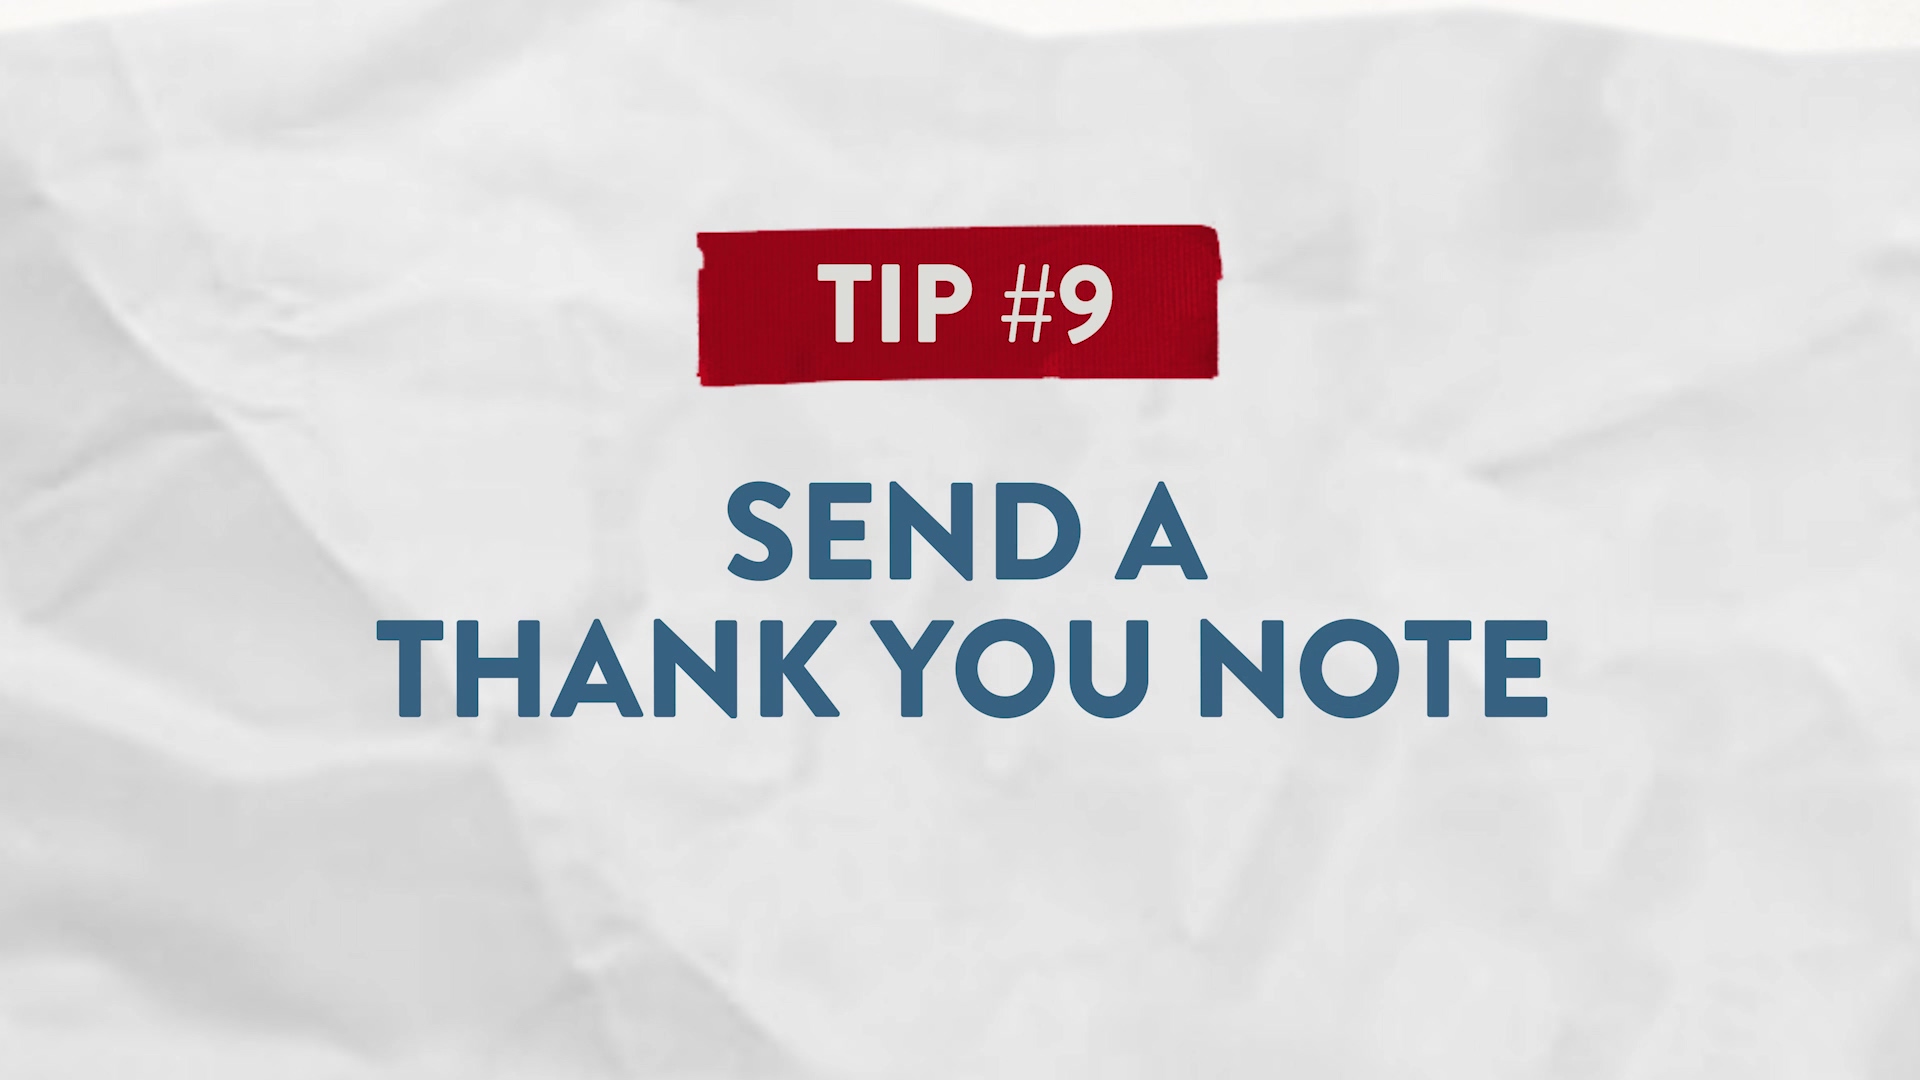 Tip #9 Send a Thank You Note